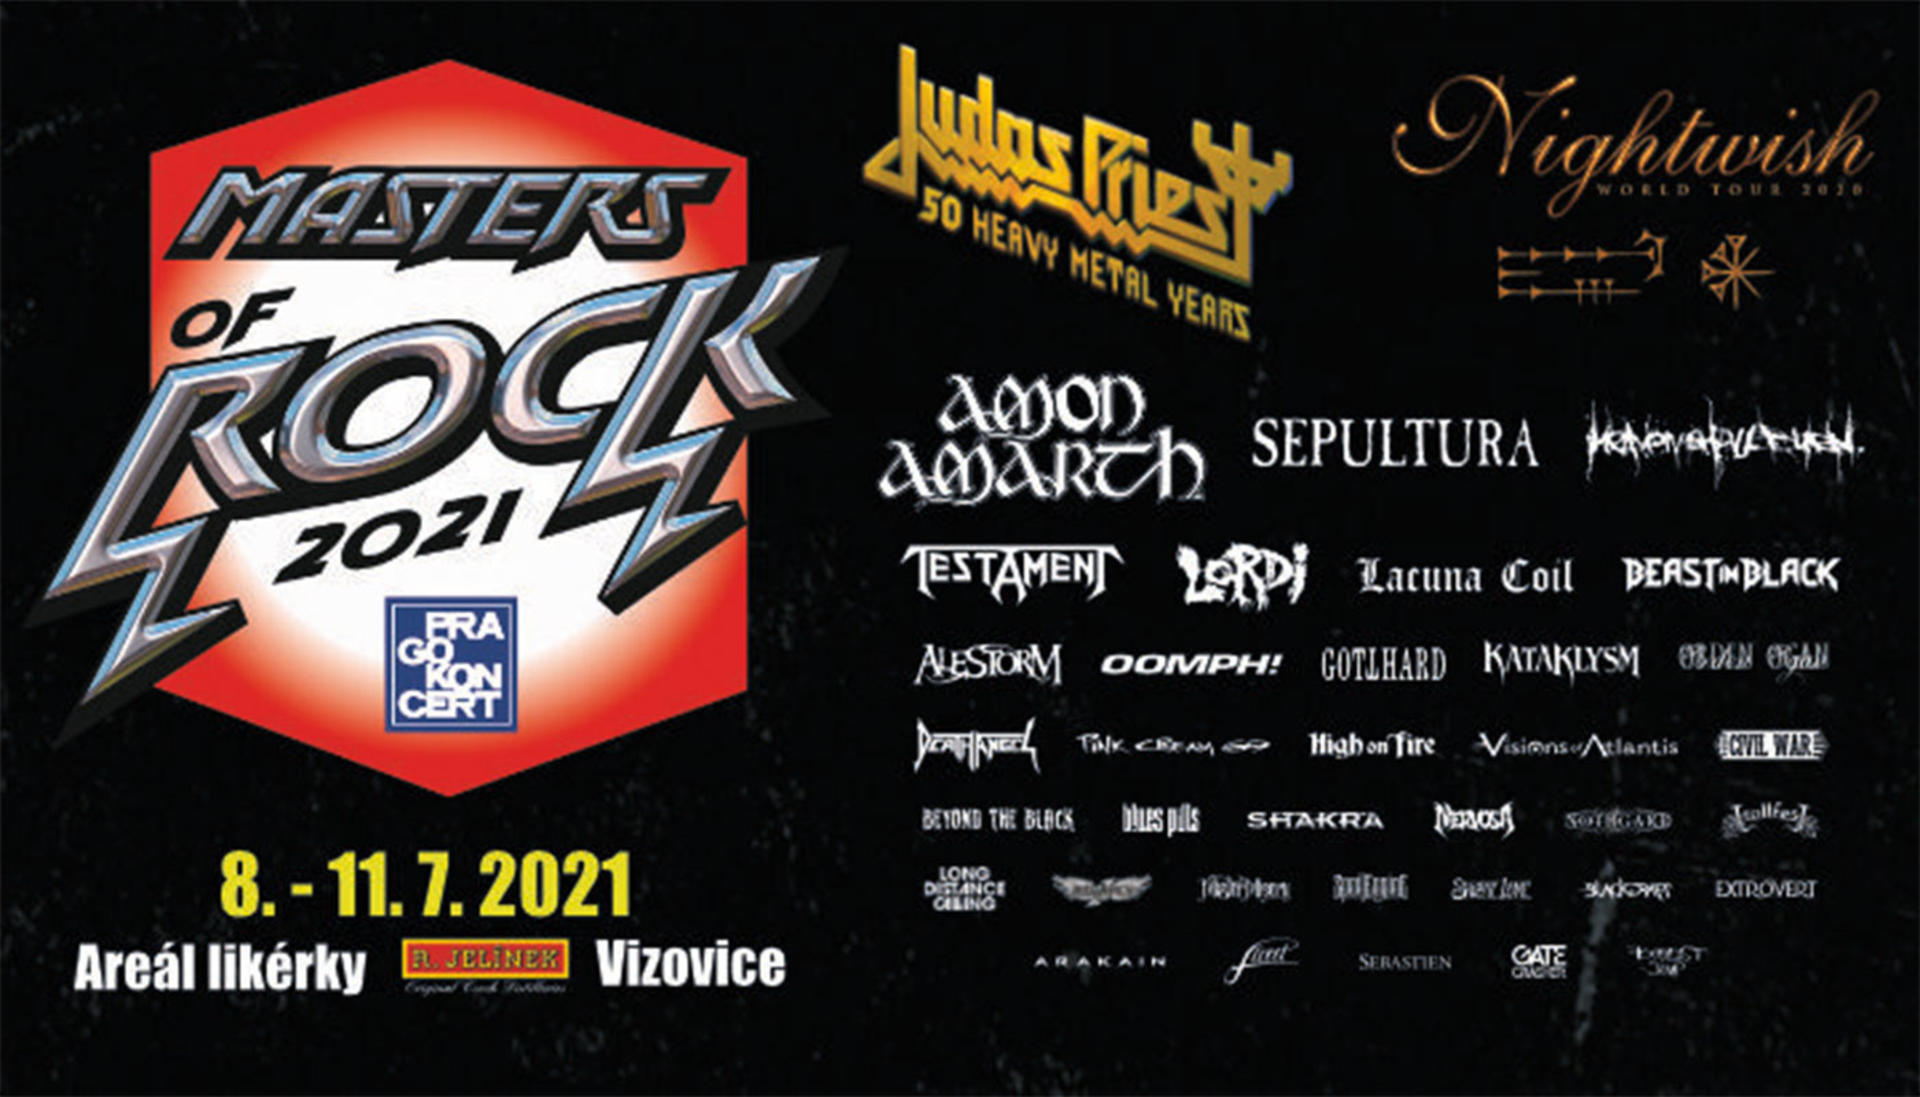 MASTERS OF ROCK Went